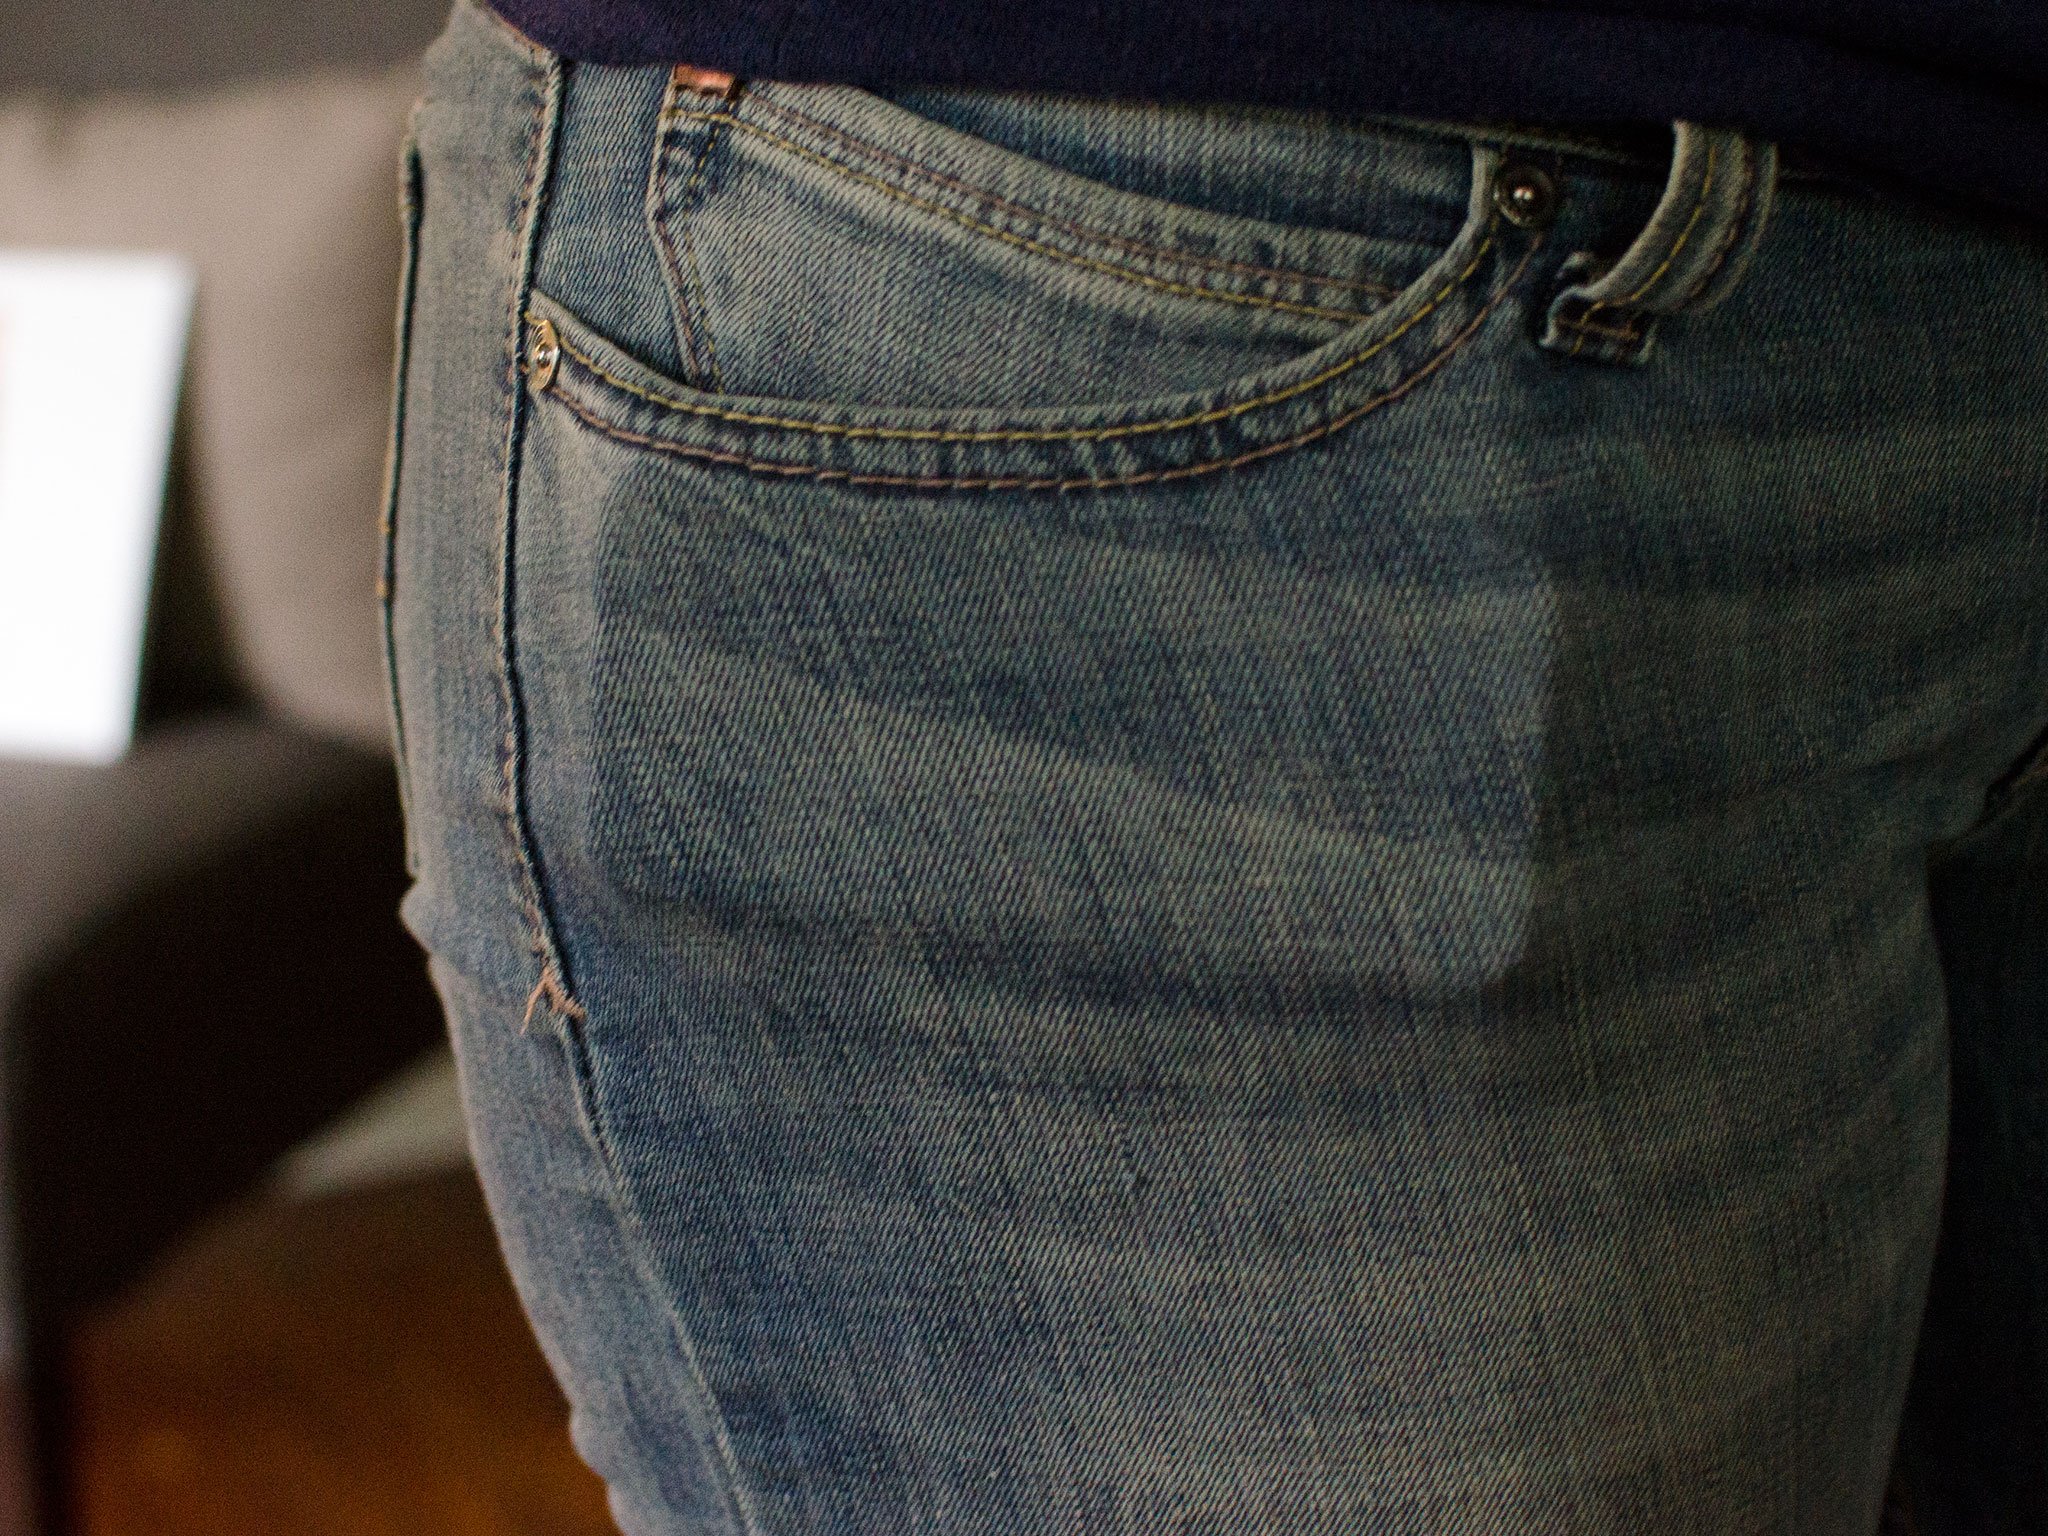 iPhone 5s front pocket view - fits sideways in most jeans, even tight ones